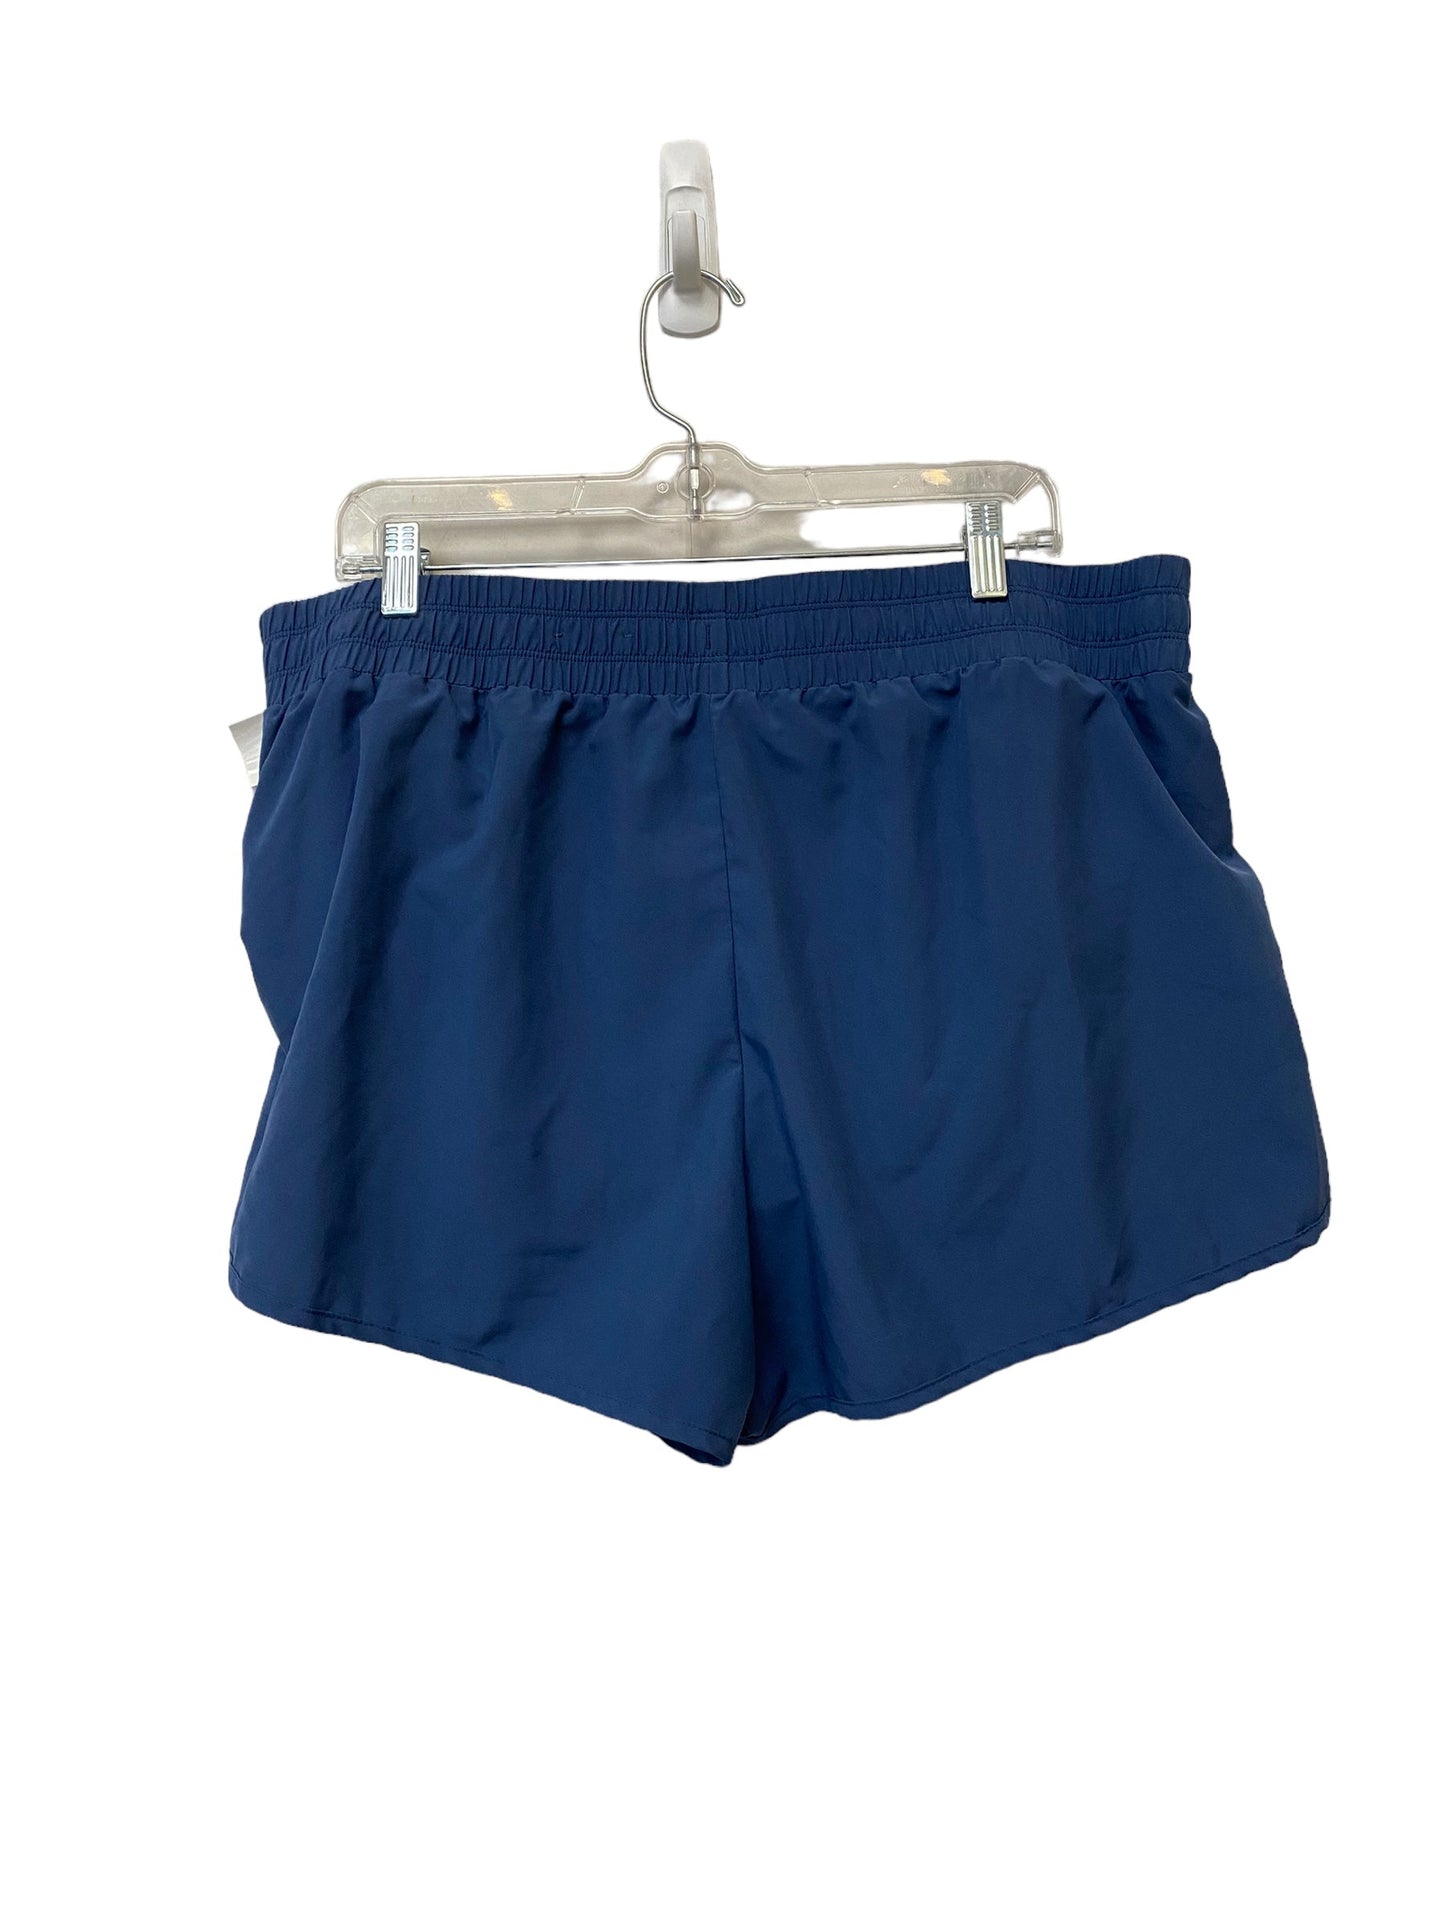 Athletic Shorts By Xersion  Size: 2x